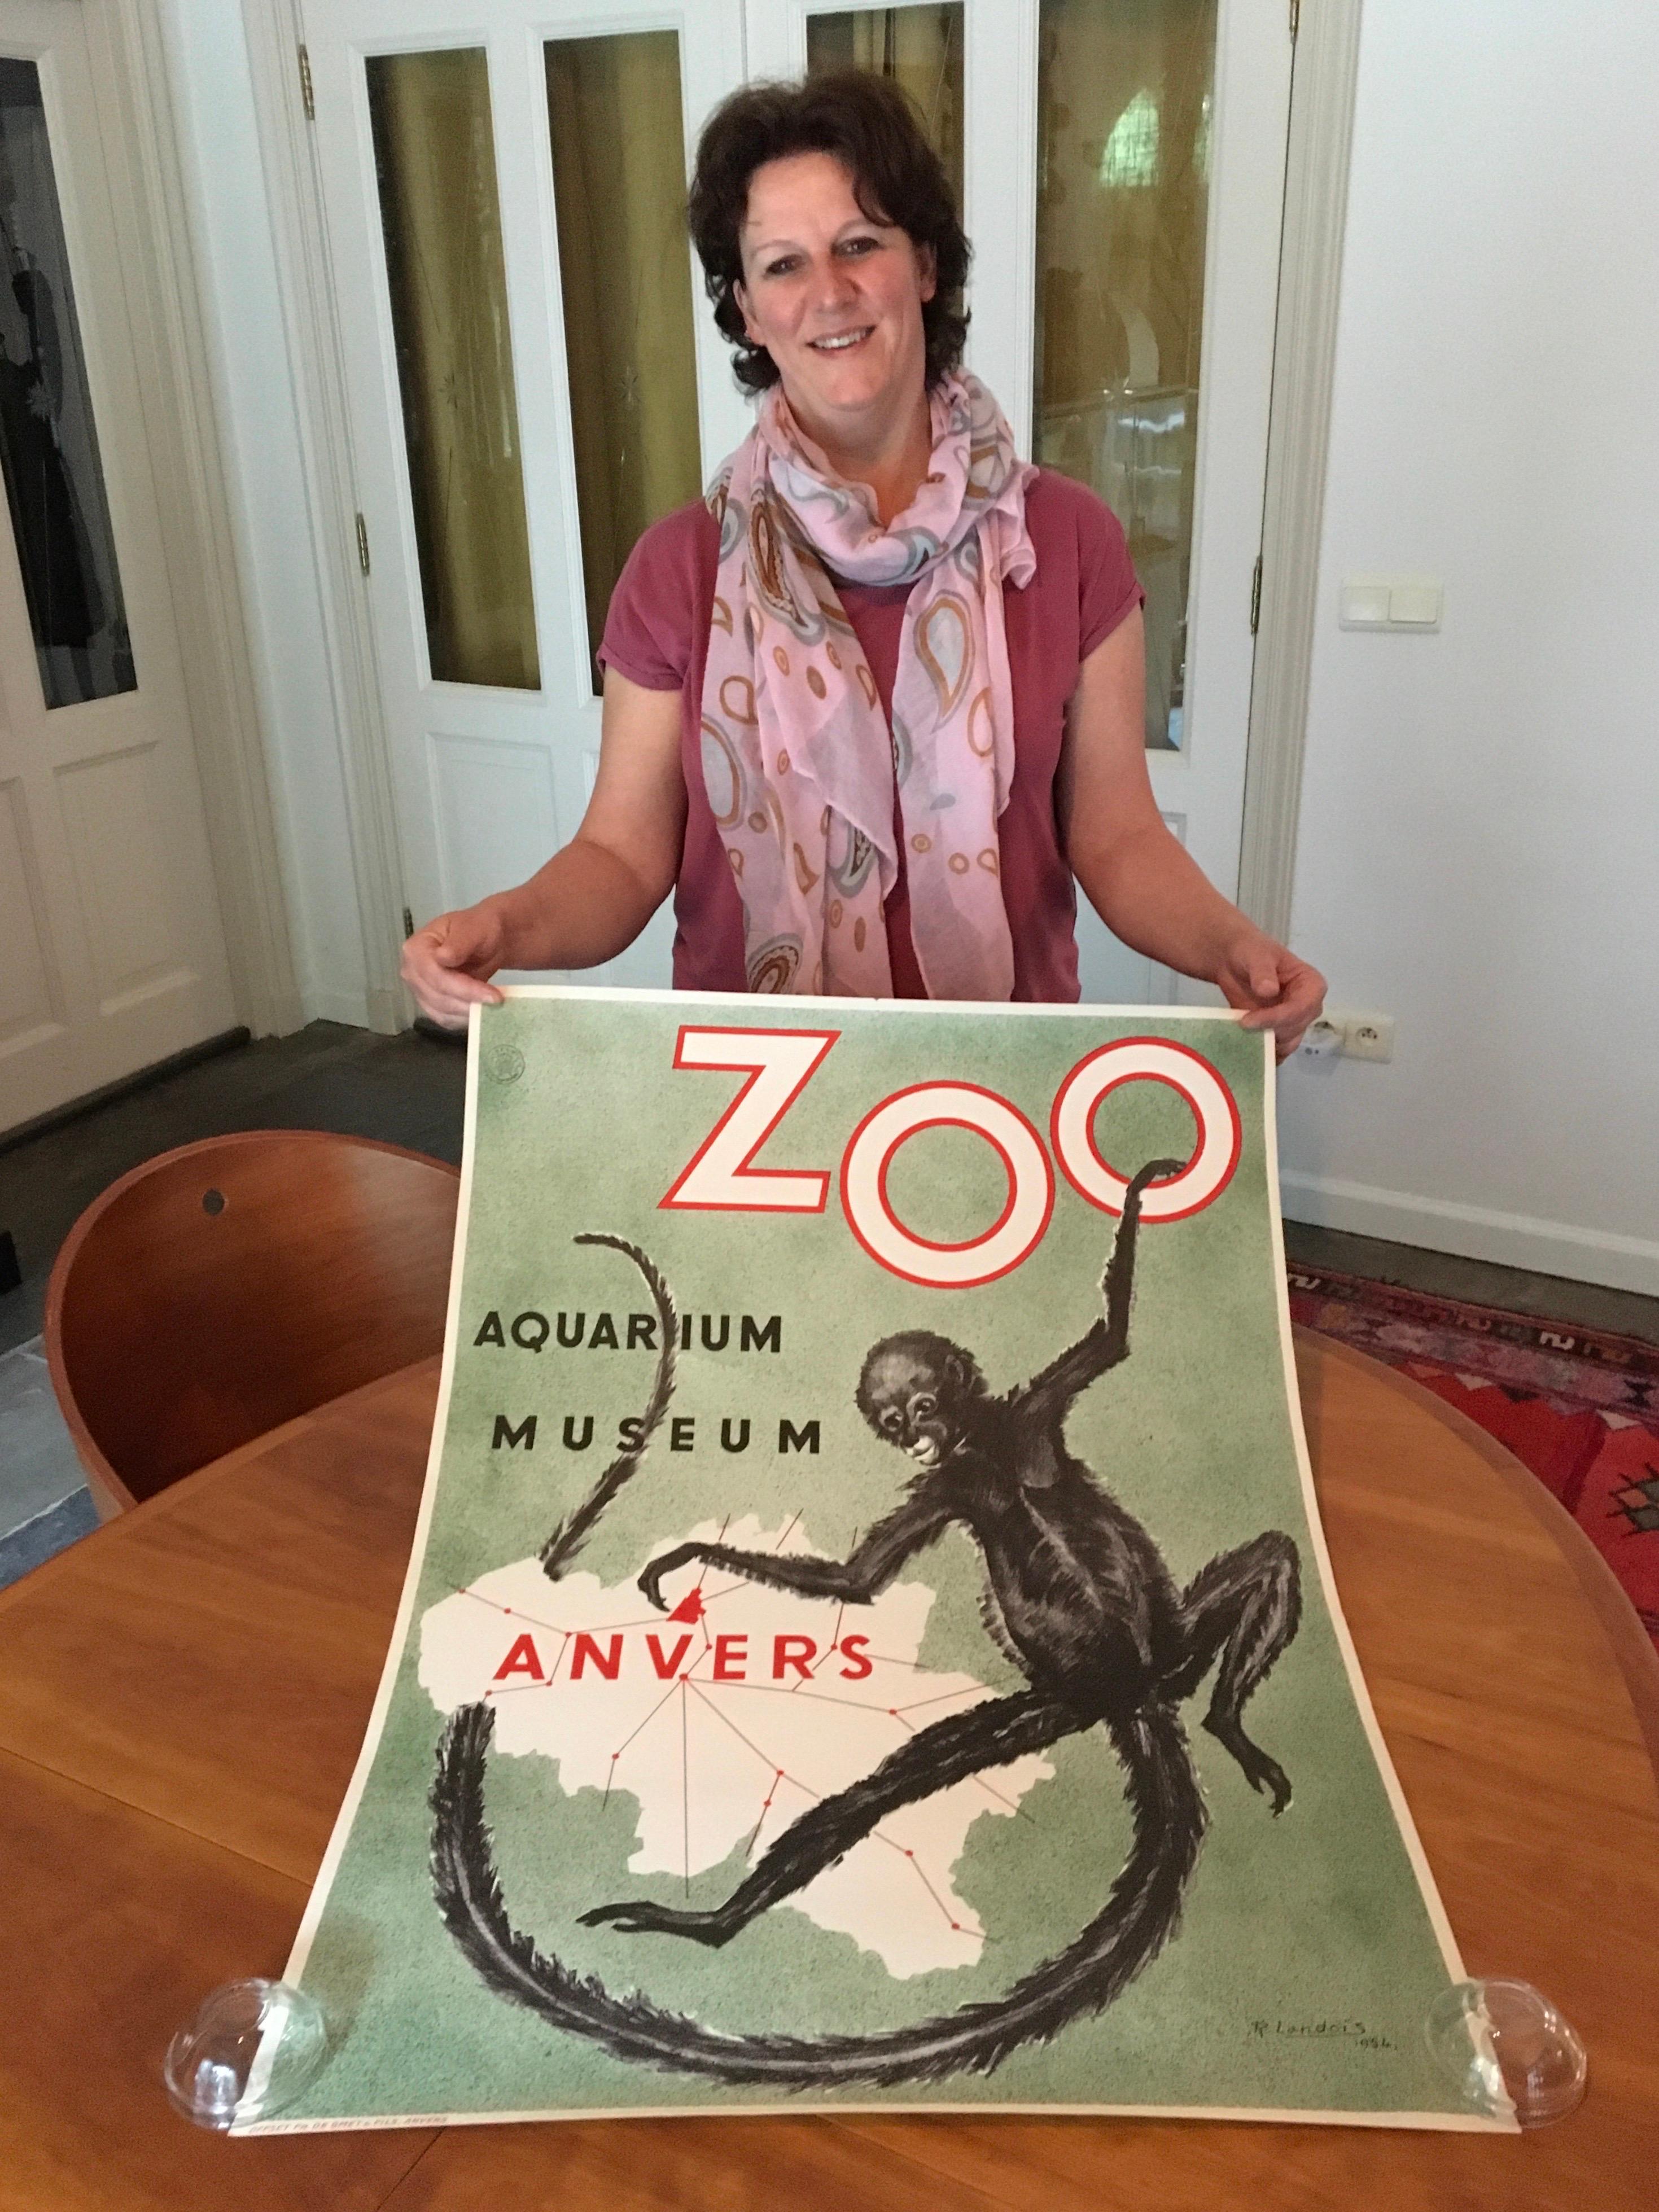 Zoo Antwerp affiche with Monkey - 1954. 
A Mid-20th Century Poster - Affiche - Litho Offset for the Zoo of Antwerp. 
Beautiful design by R.Landois : 
A green colored poster with a spider monkey - at , 
designed for the promotion of the Aquarium